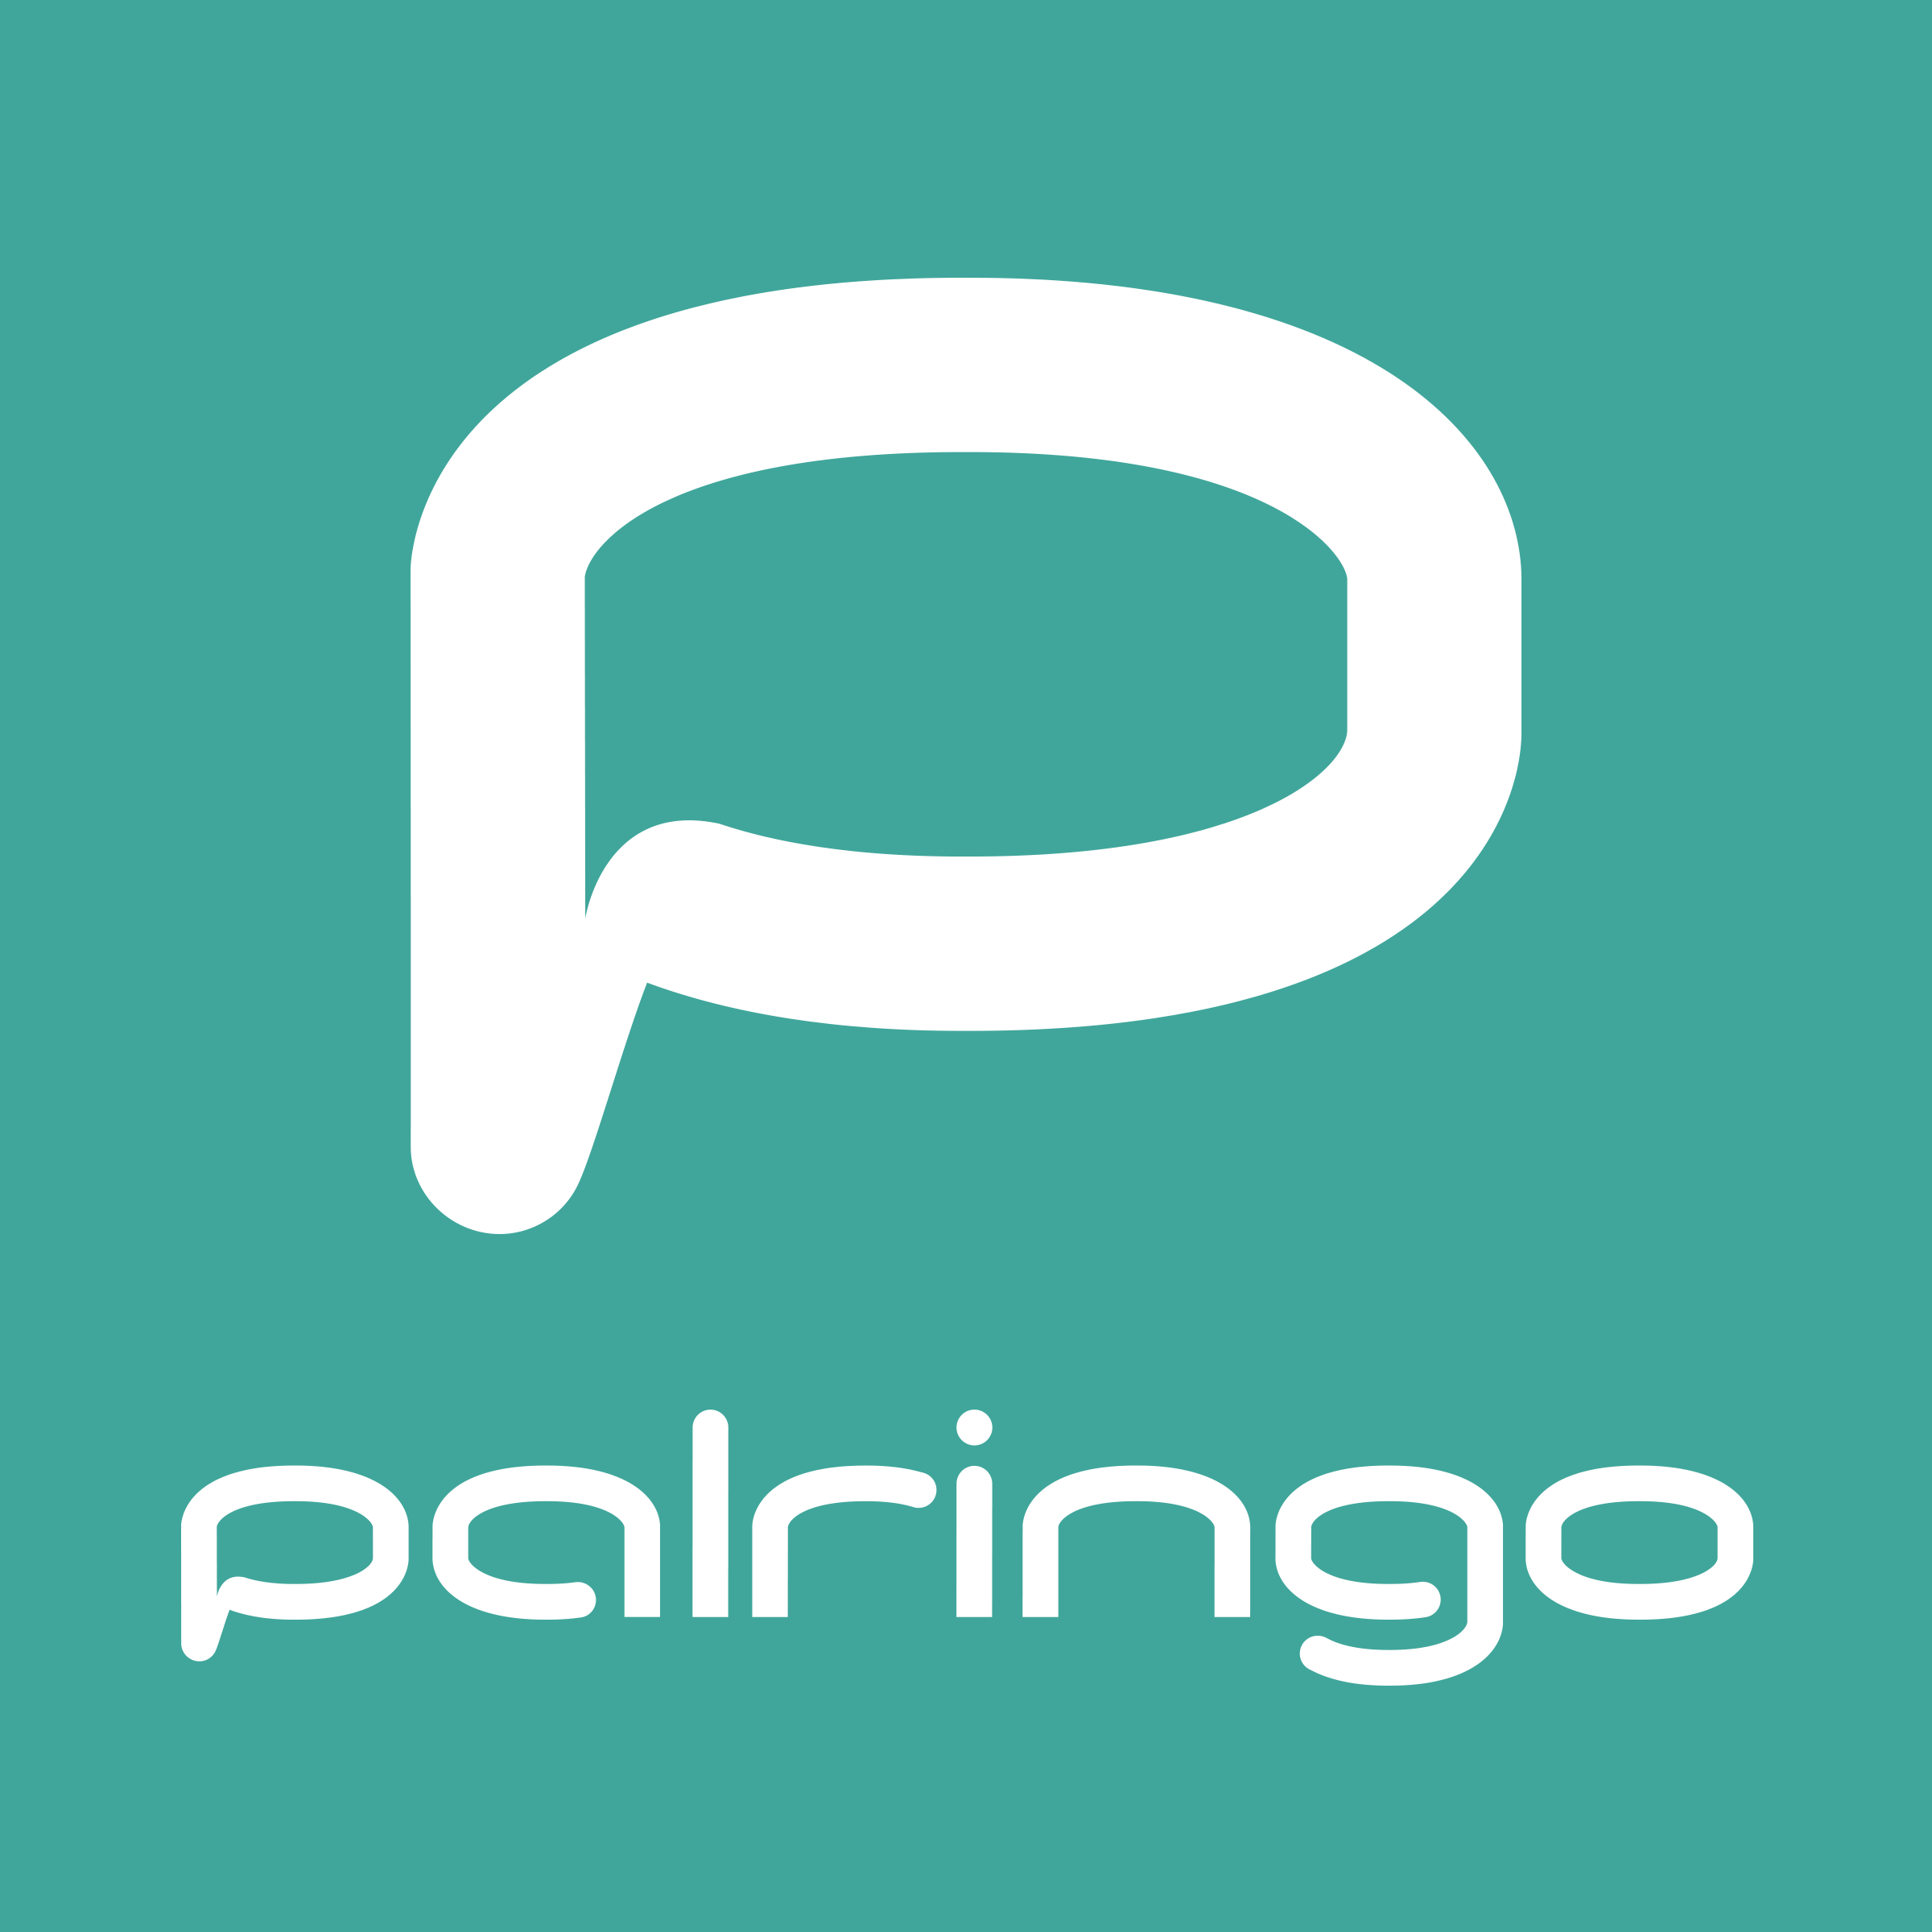 Teal Logo - File:Palringo logo teal 2400x2400px copy.png - Wikimedia Commons